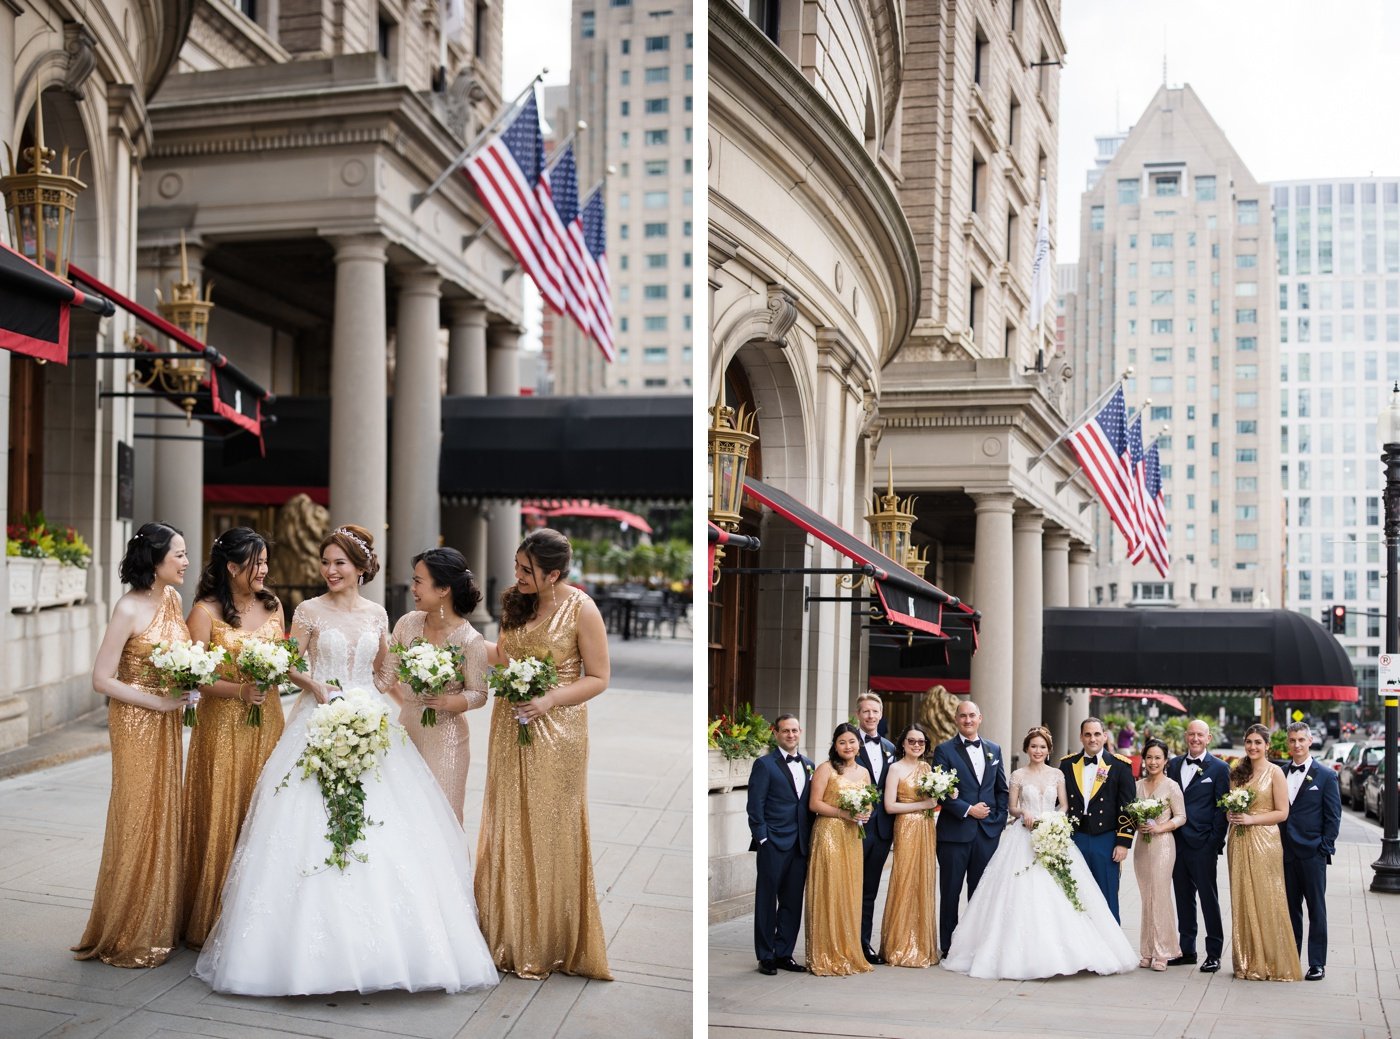 Wedding party portraits in Copley Square